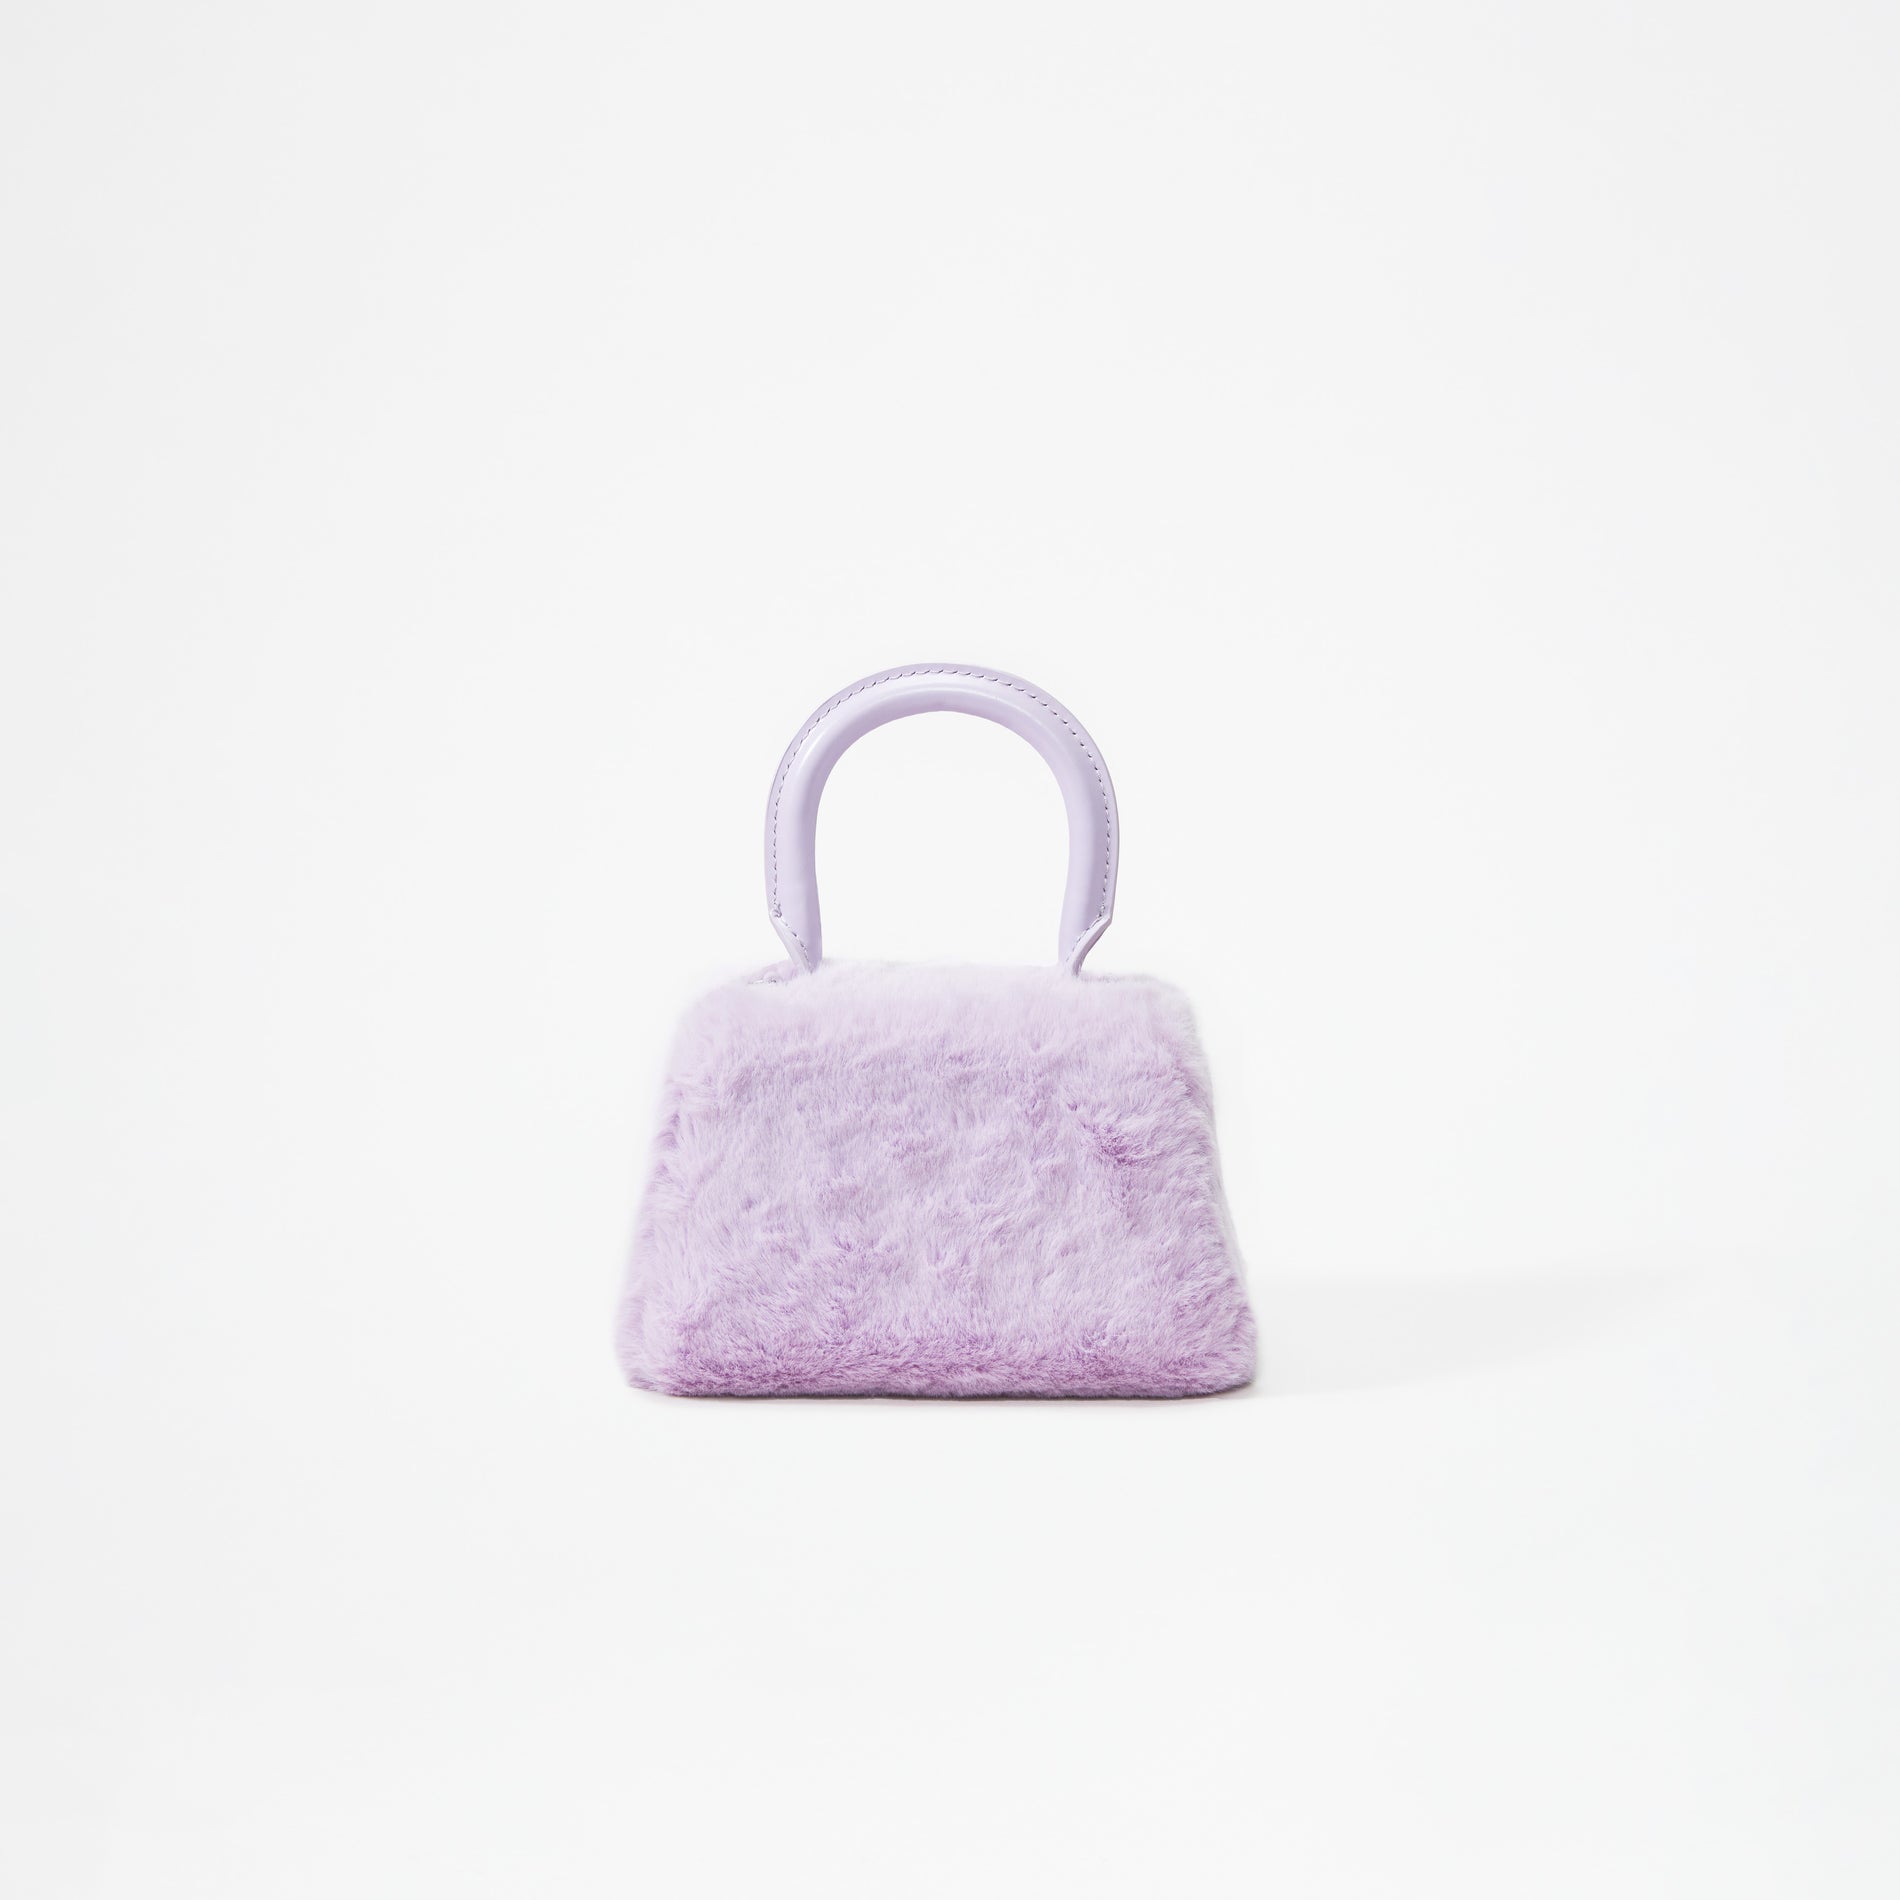 A woman wearing the Lilac Fluffy Bow Micro Bag